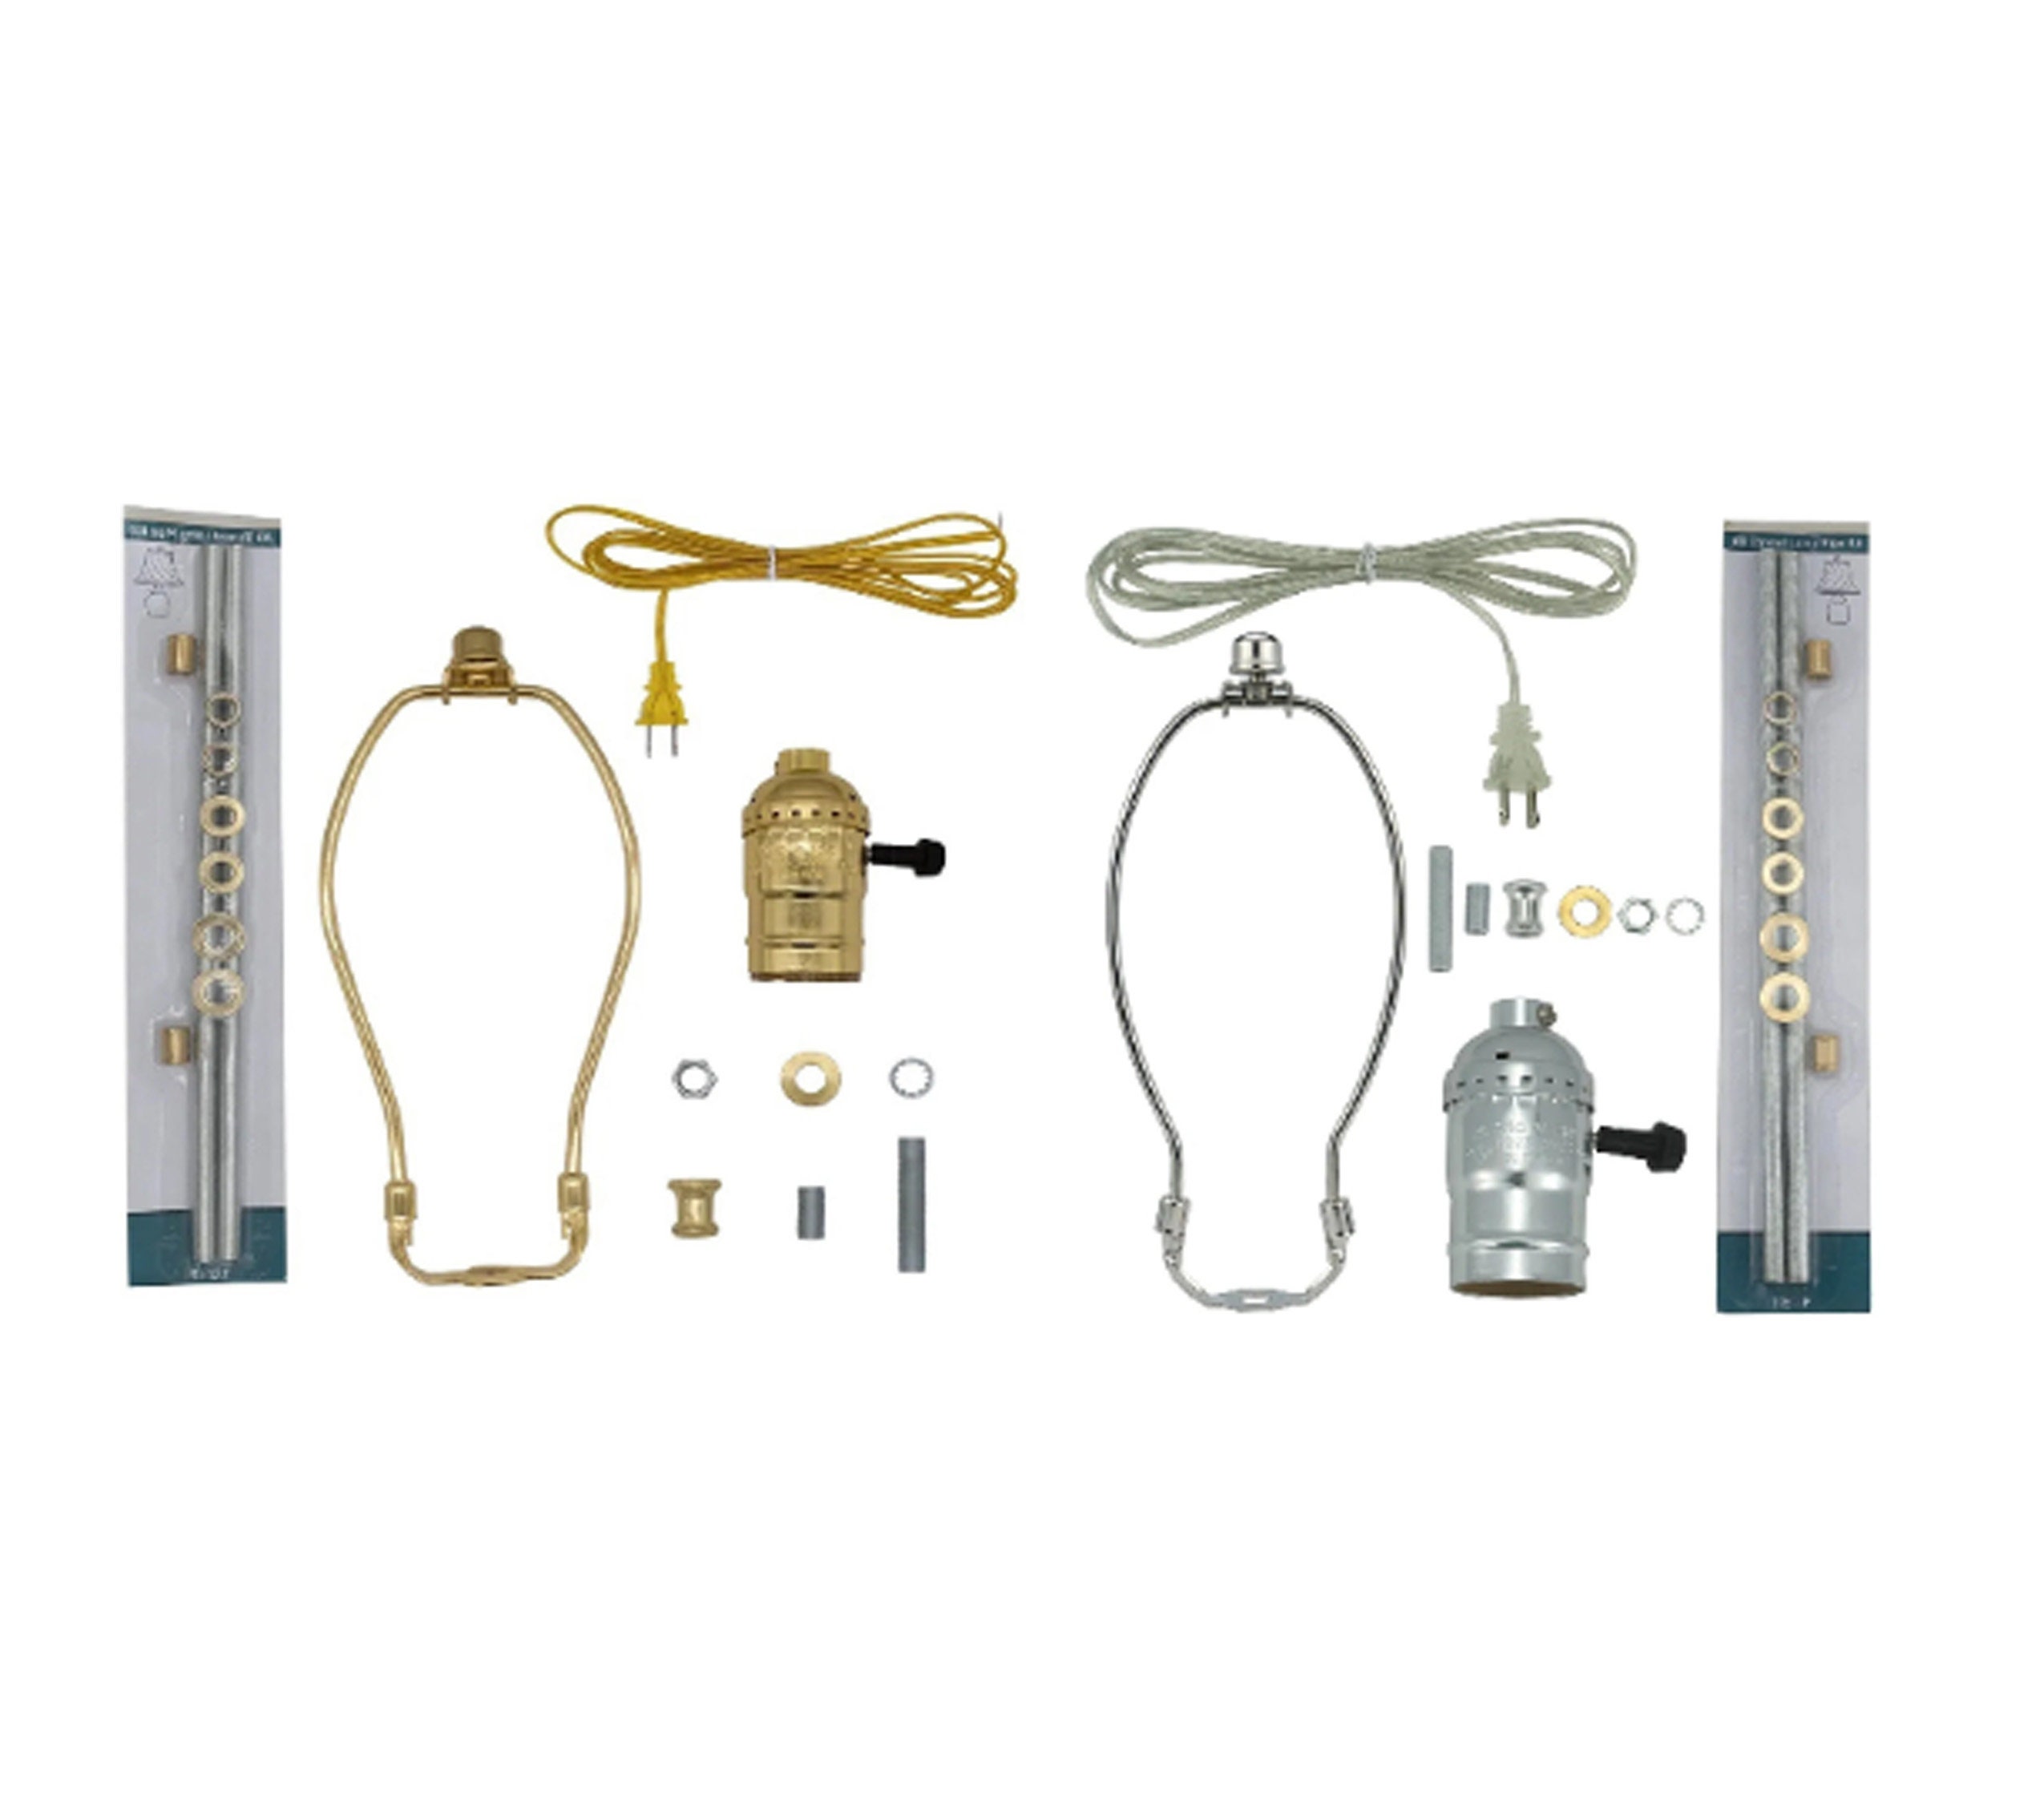 Lamp Wiring Kit-Make or Repair Old Lamps-Rewire a Vintage Lamp or Create a  Custom Light Fixture with Lamp Making Kit-Glossy Brass Socket Set-12 Foot